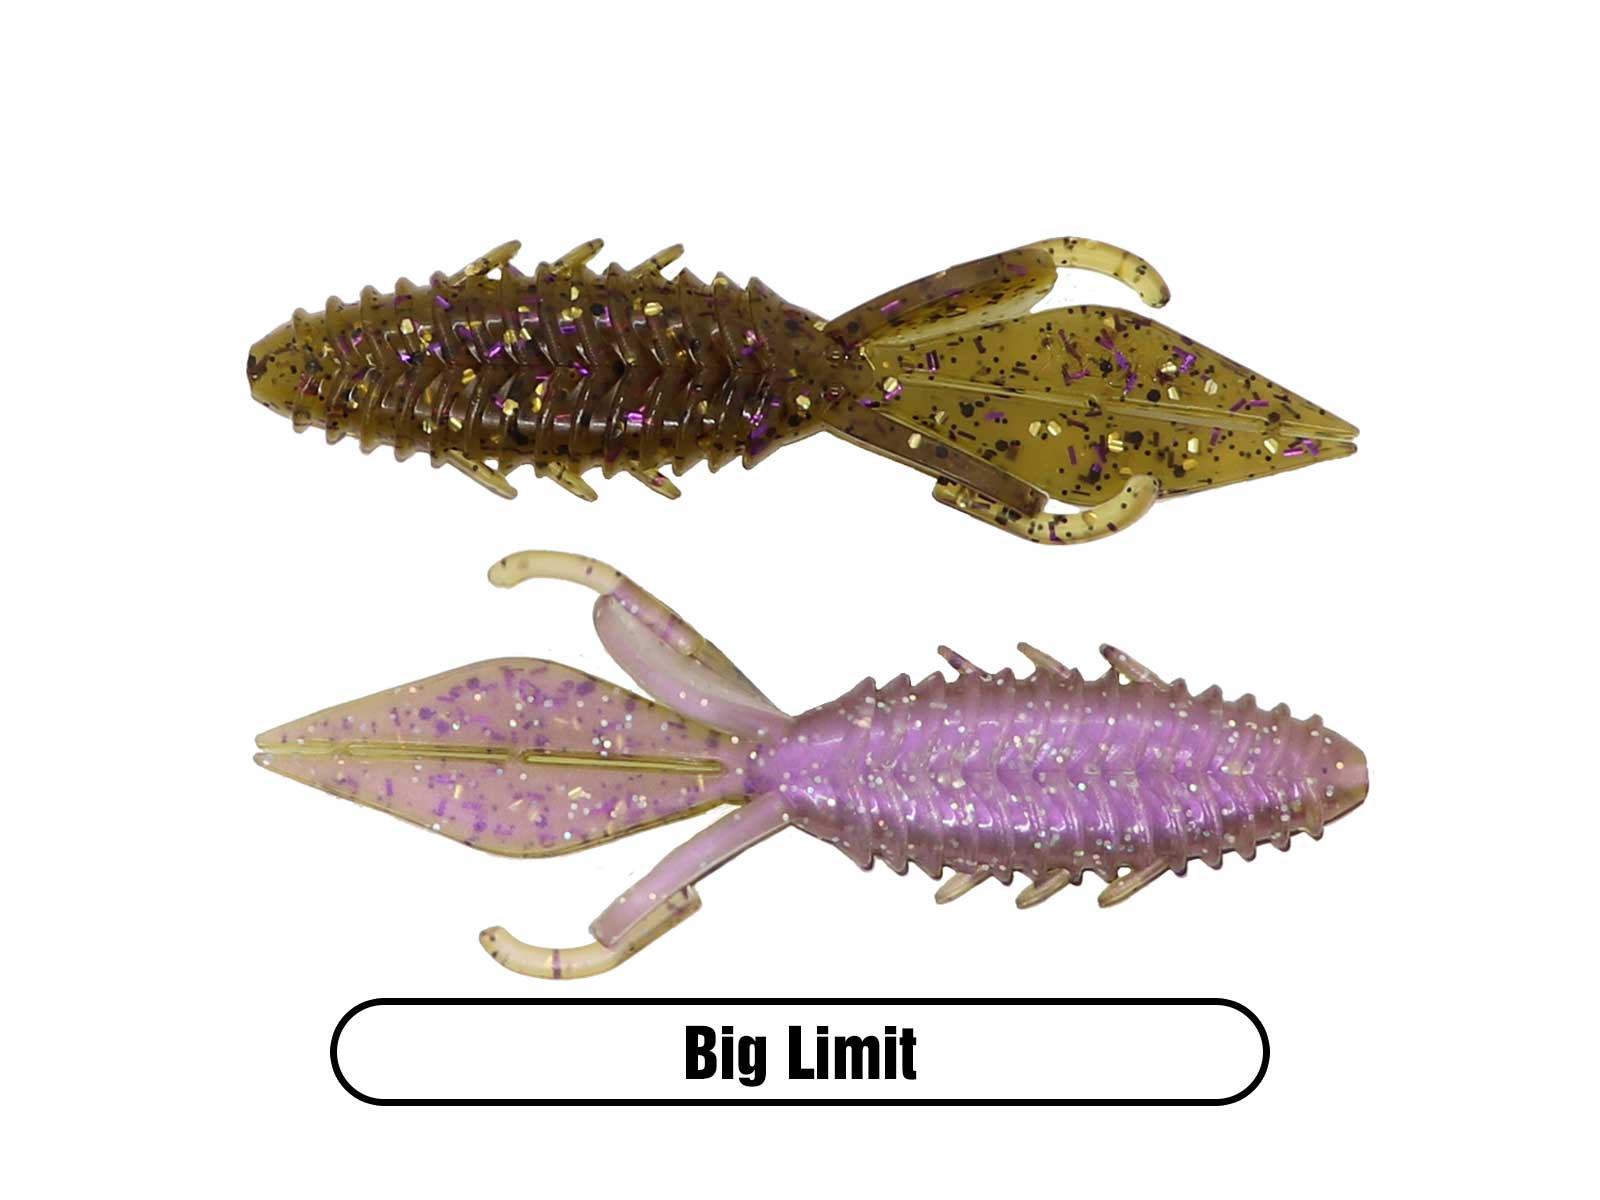 Soft Plastic Beaver Creature Style Bait for Largemouth Bass Fishing, Smallmouth Bass and Walleye Fishing Lure